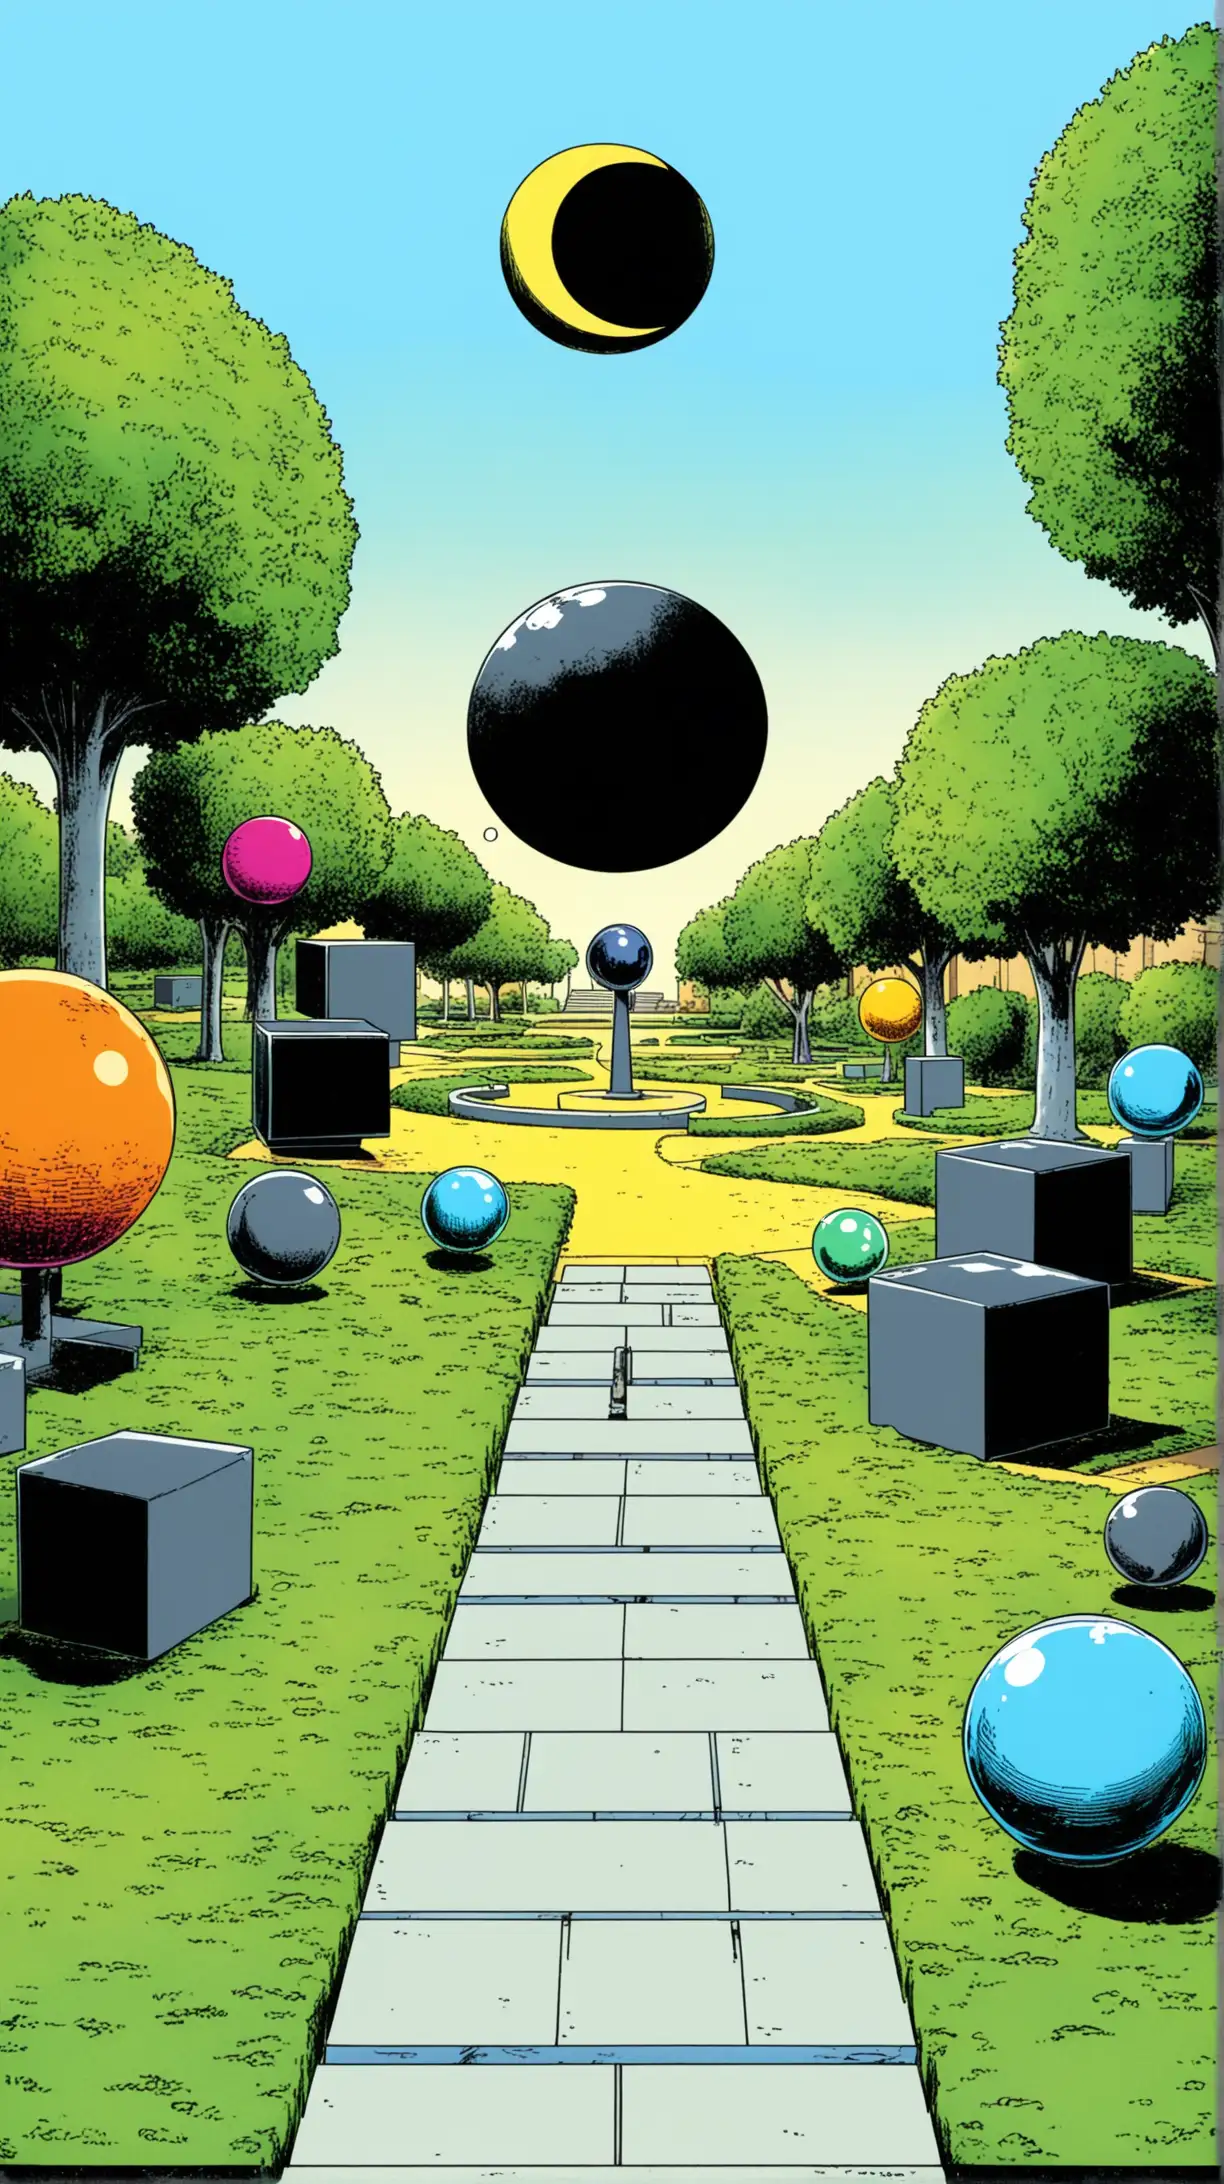 Cartoony color:  Classic comic book. Daytime... An outdoor sculpure garden with large black, metal forms a cube, a rectrangle, a sphere and a crescent moon all bigger than a man.  Leave enough room for a walking path...